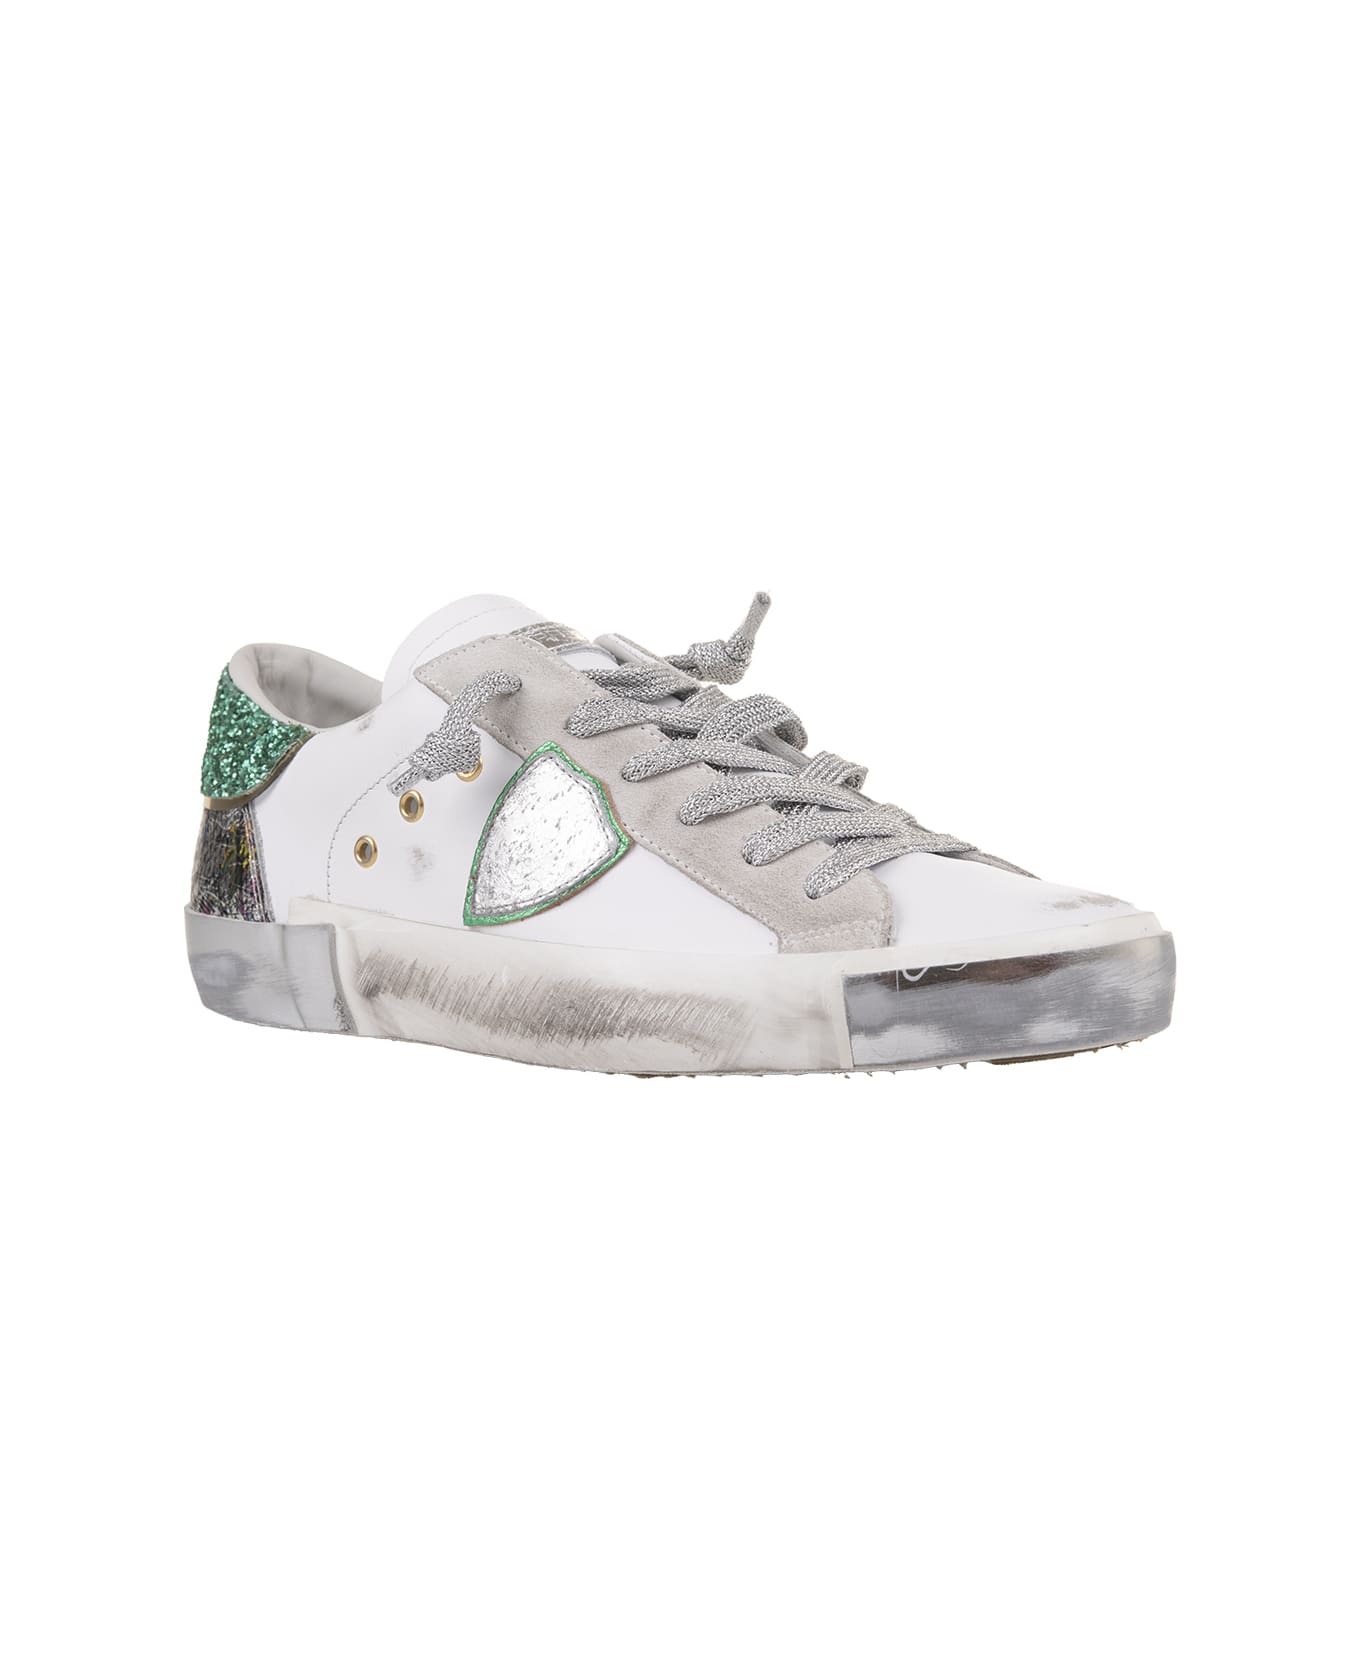 Philippe Model Prsx Low Sneakers - White And Green - White